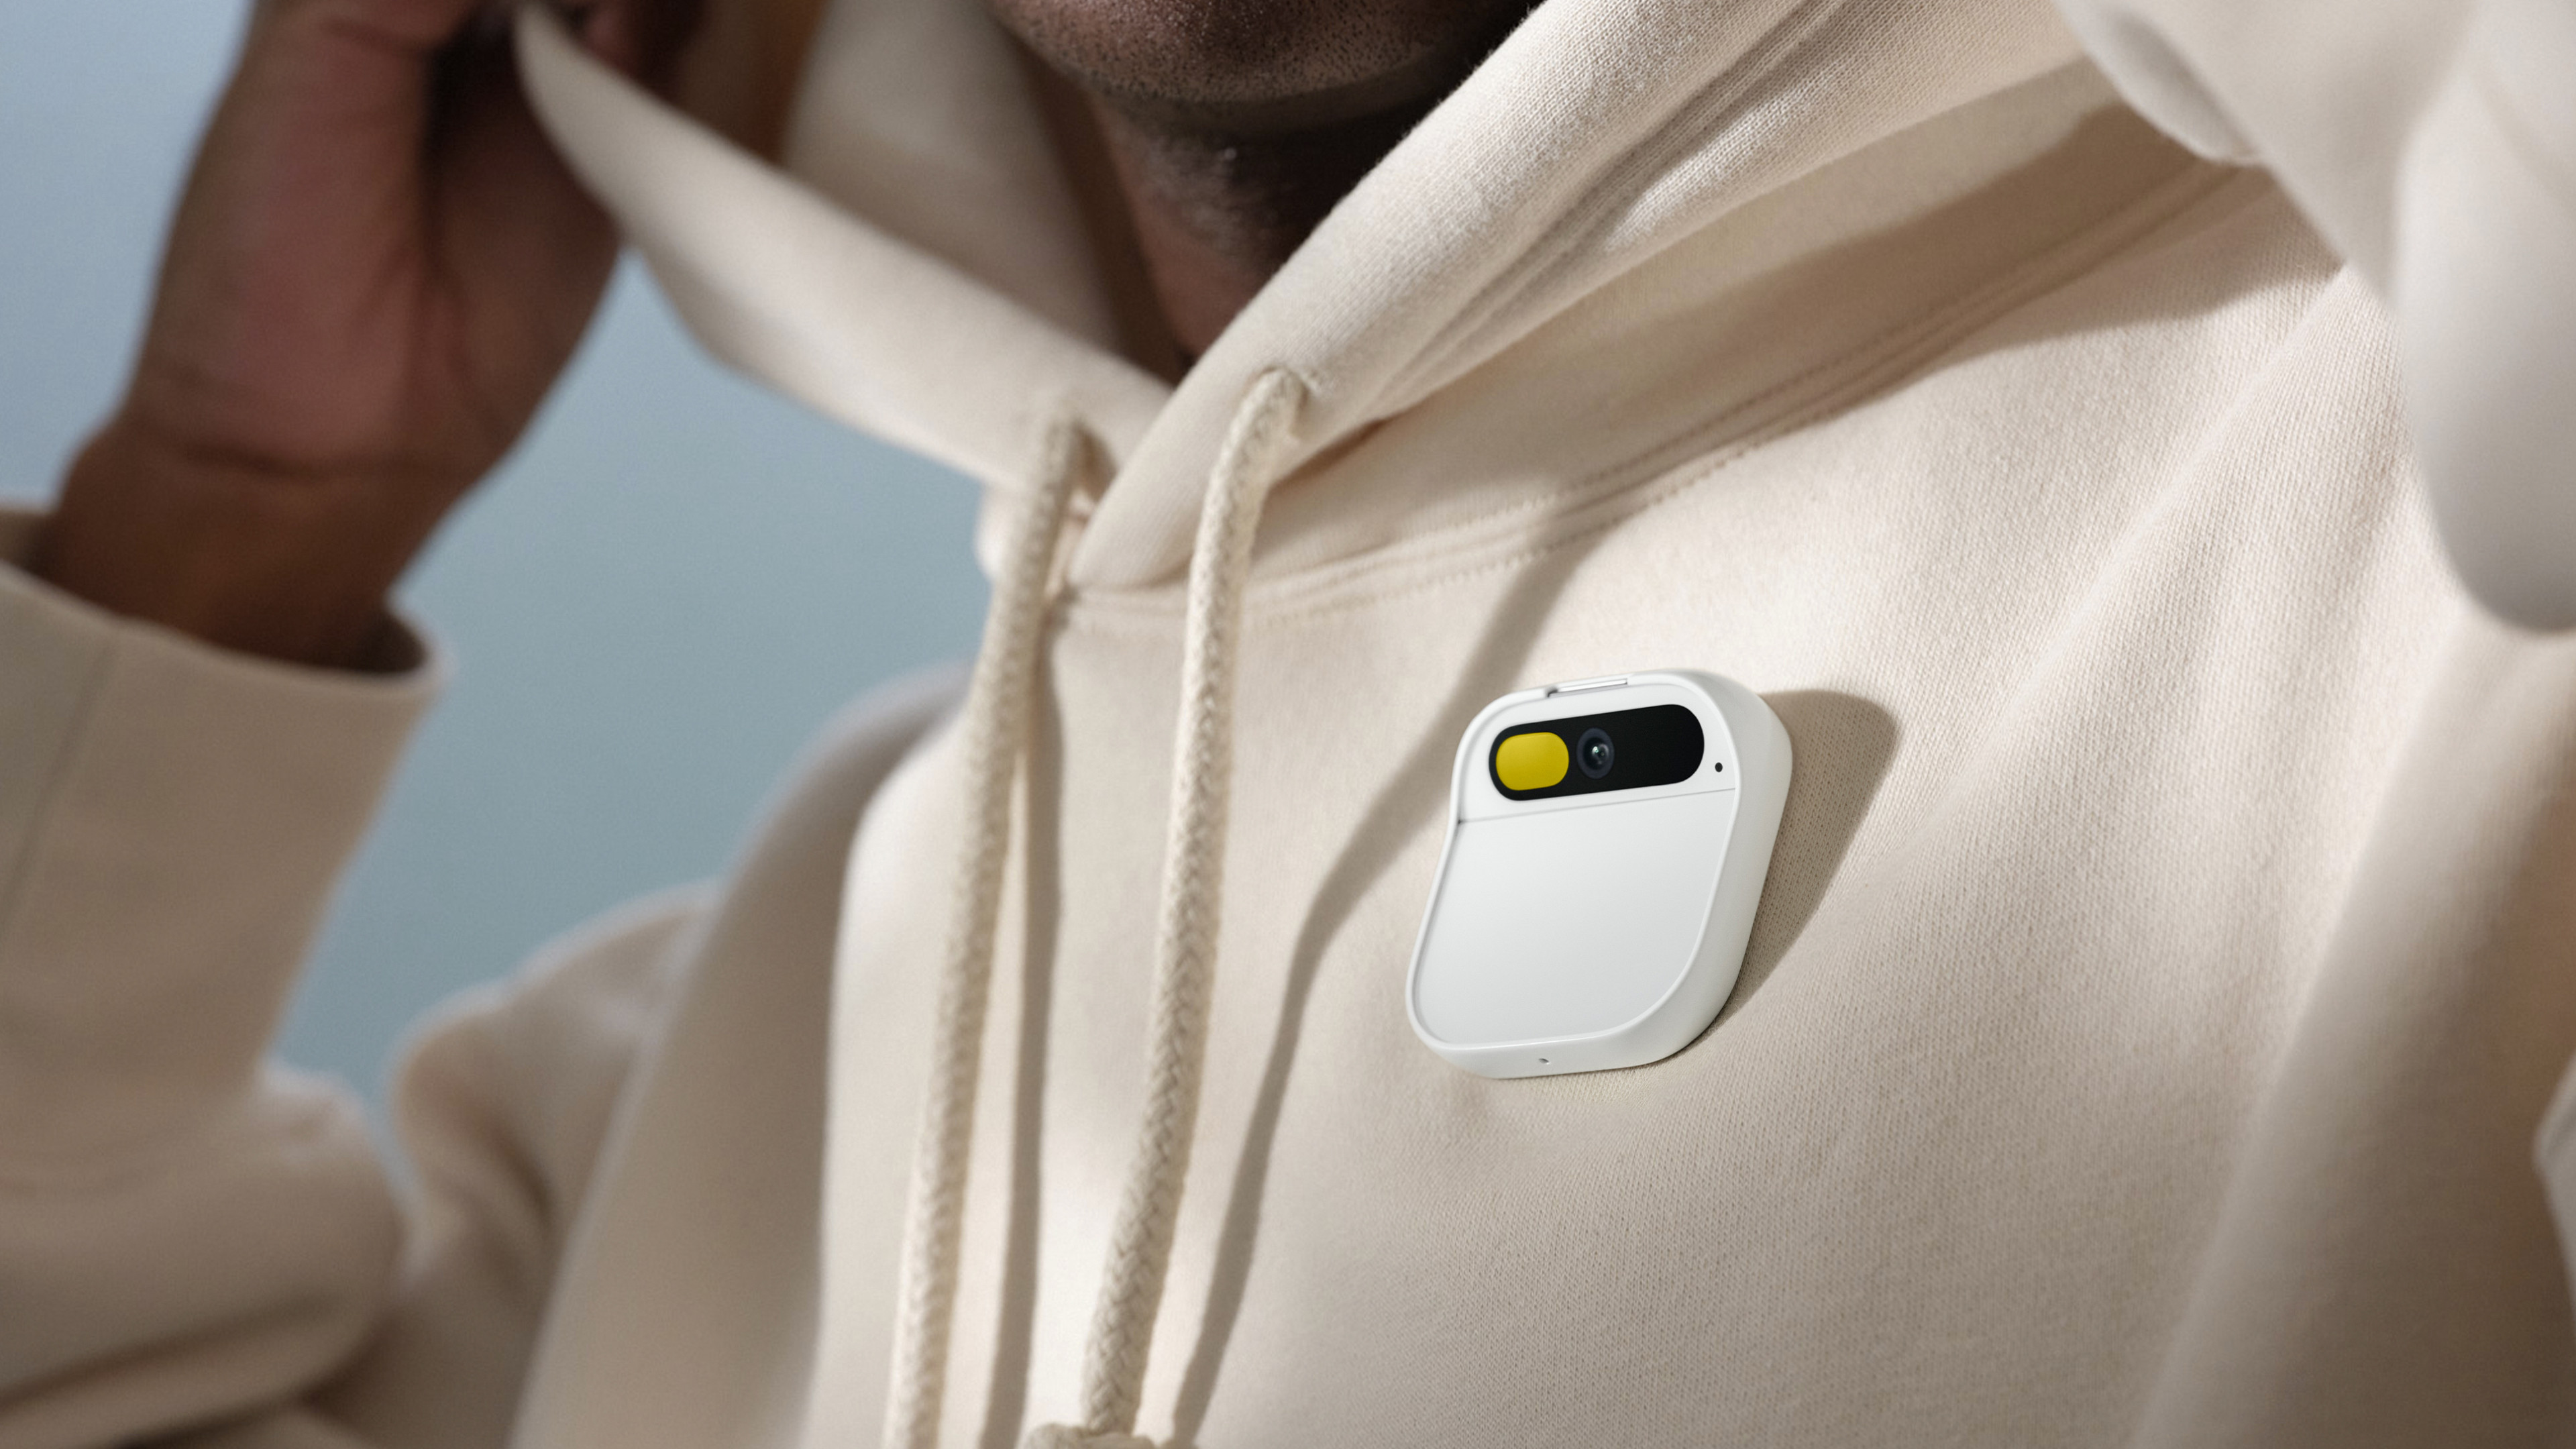 Silicon Valley start-up Humane released its US$699 Ai Pin device on Thursday. Photo: Handout